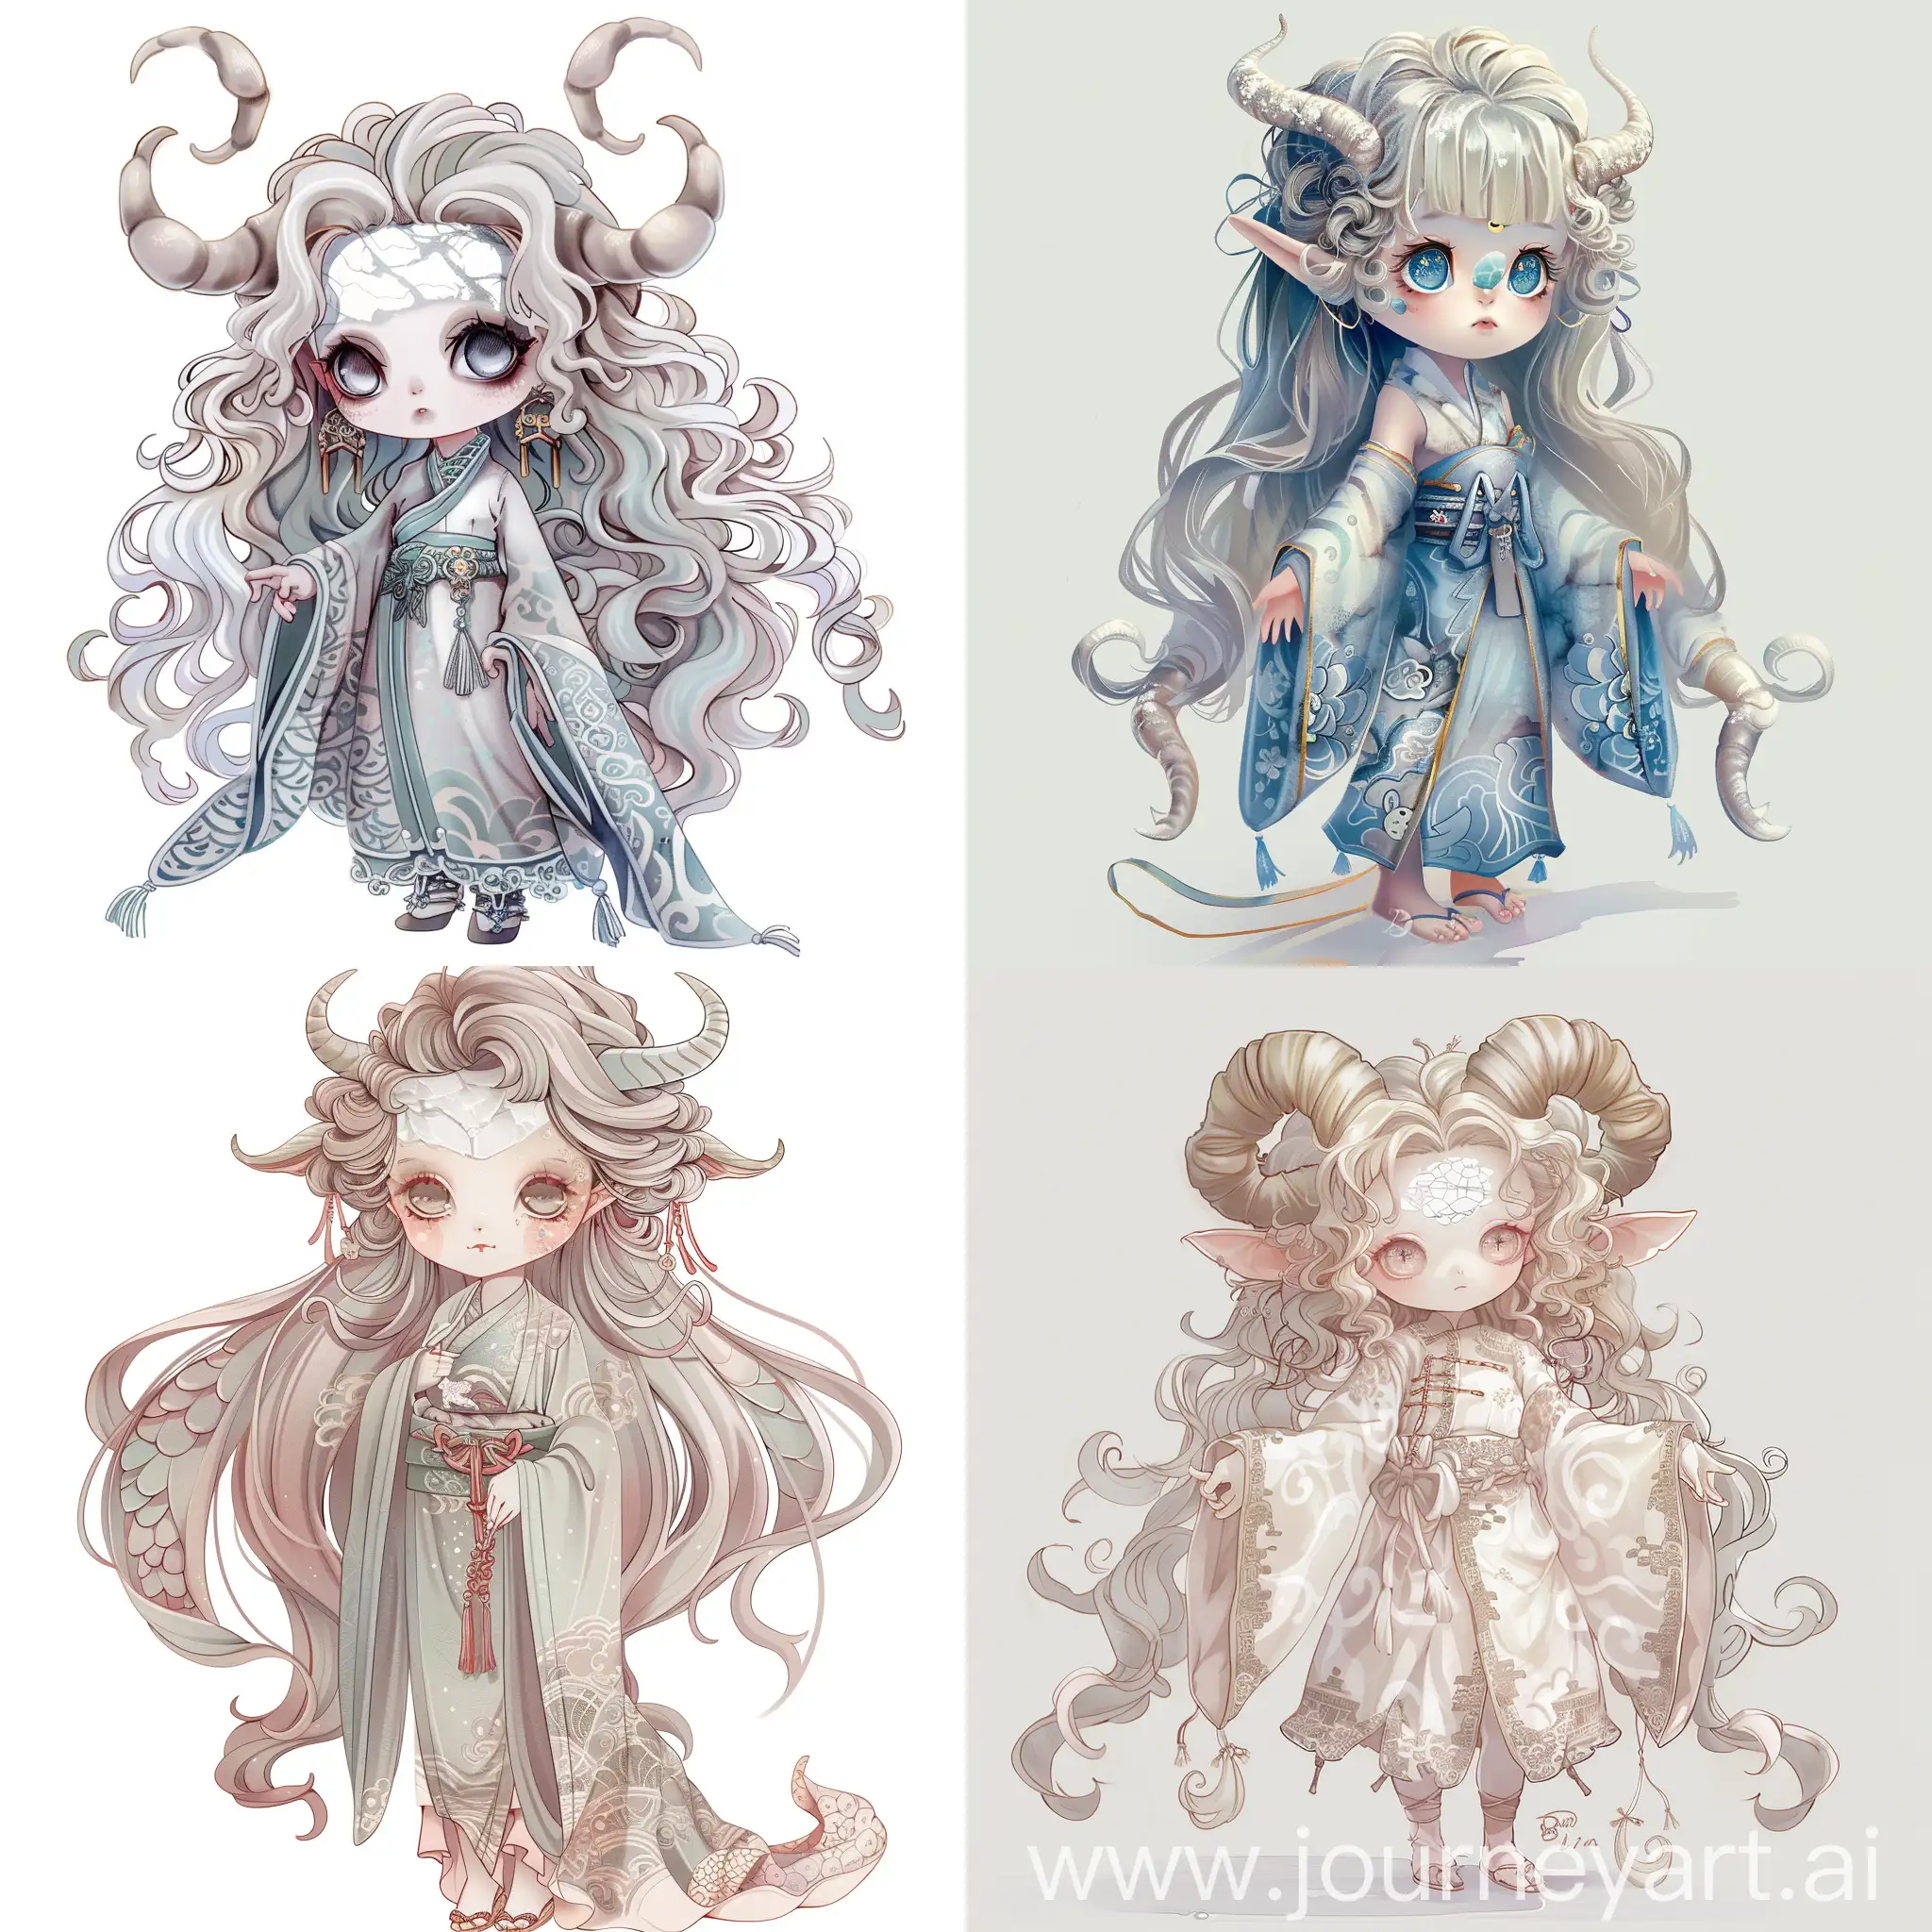 Monster girl, small horns from the forehead, porcelain doll, marble stone pattern on the skin, long hair curly at the ends, oriental style clothes, pastel palette, chibi style, full-length 